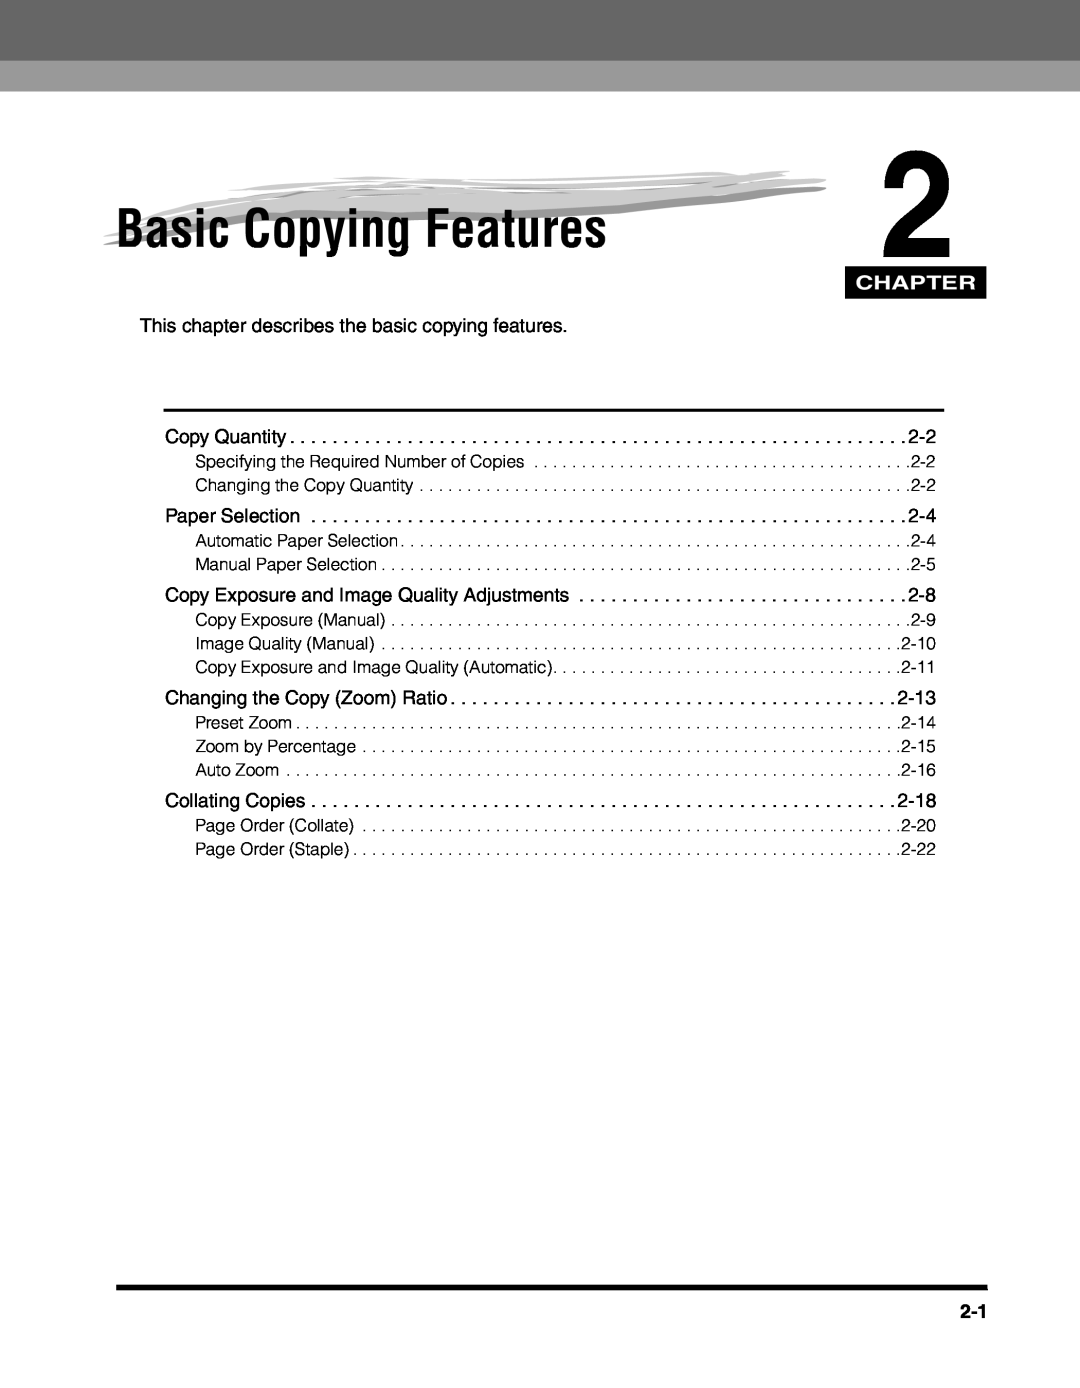 Canon 2010F manual Basic Copying Features, Chapter, This chapter describes the basic copying features Copy Quantity 